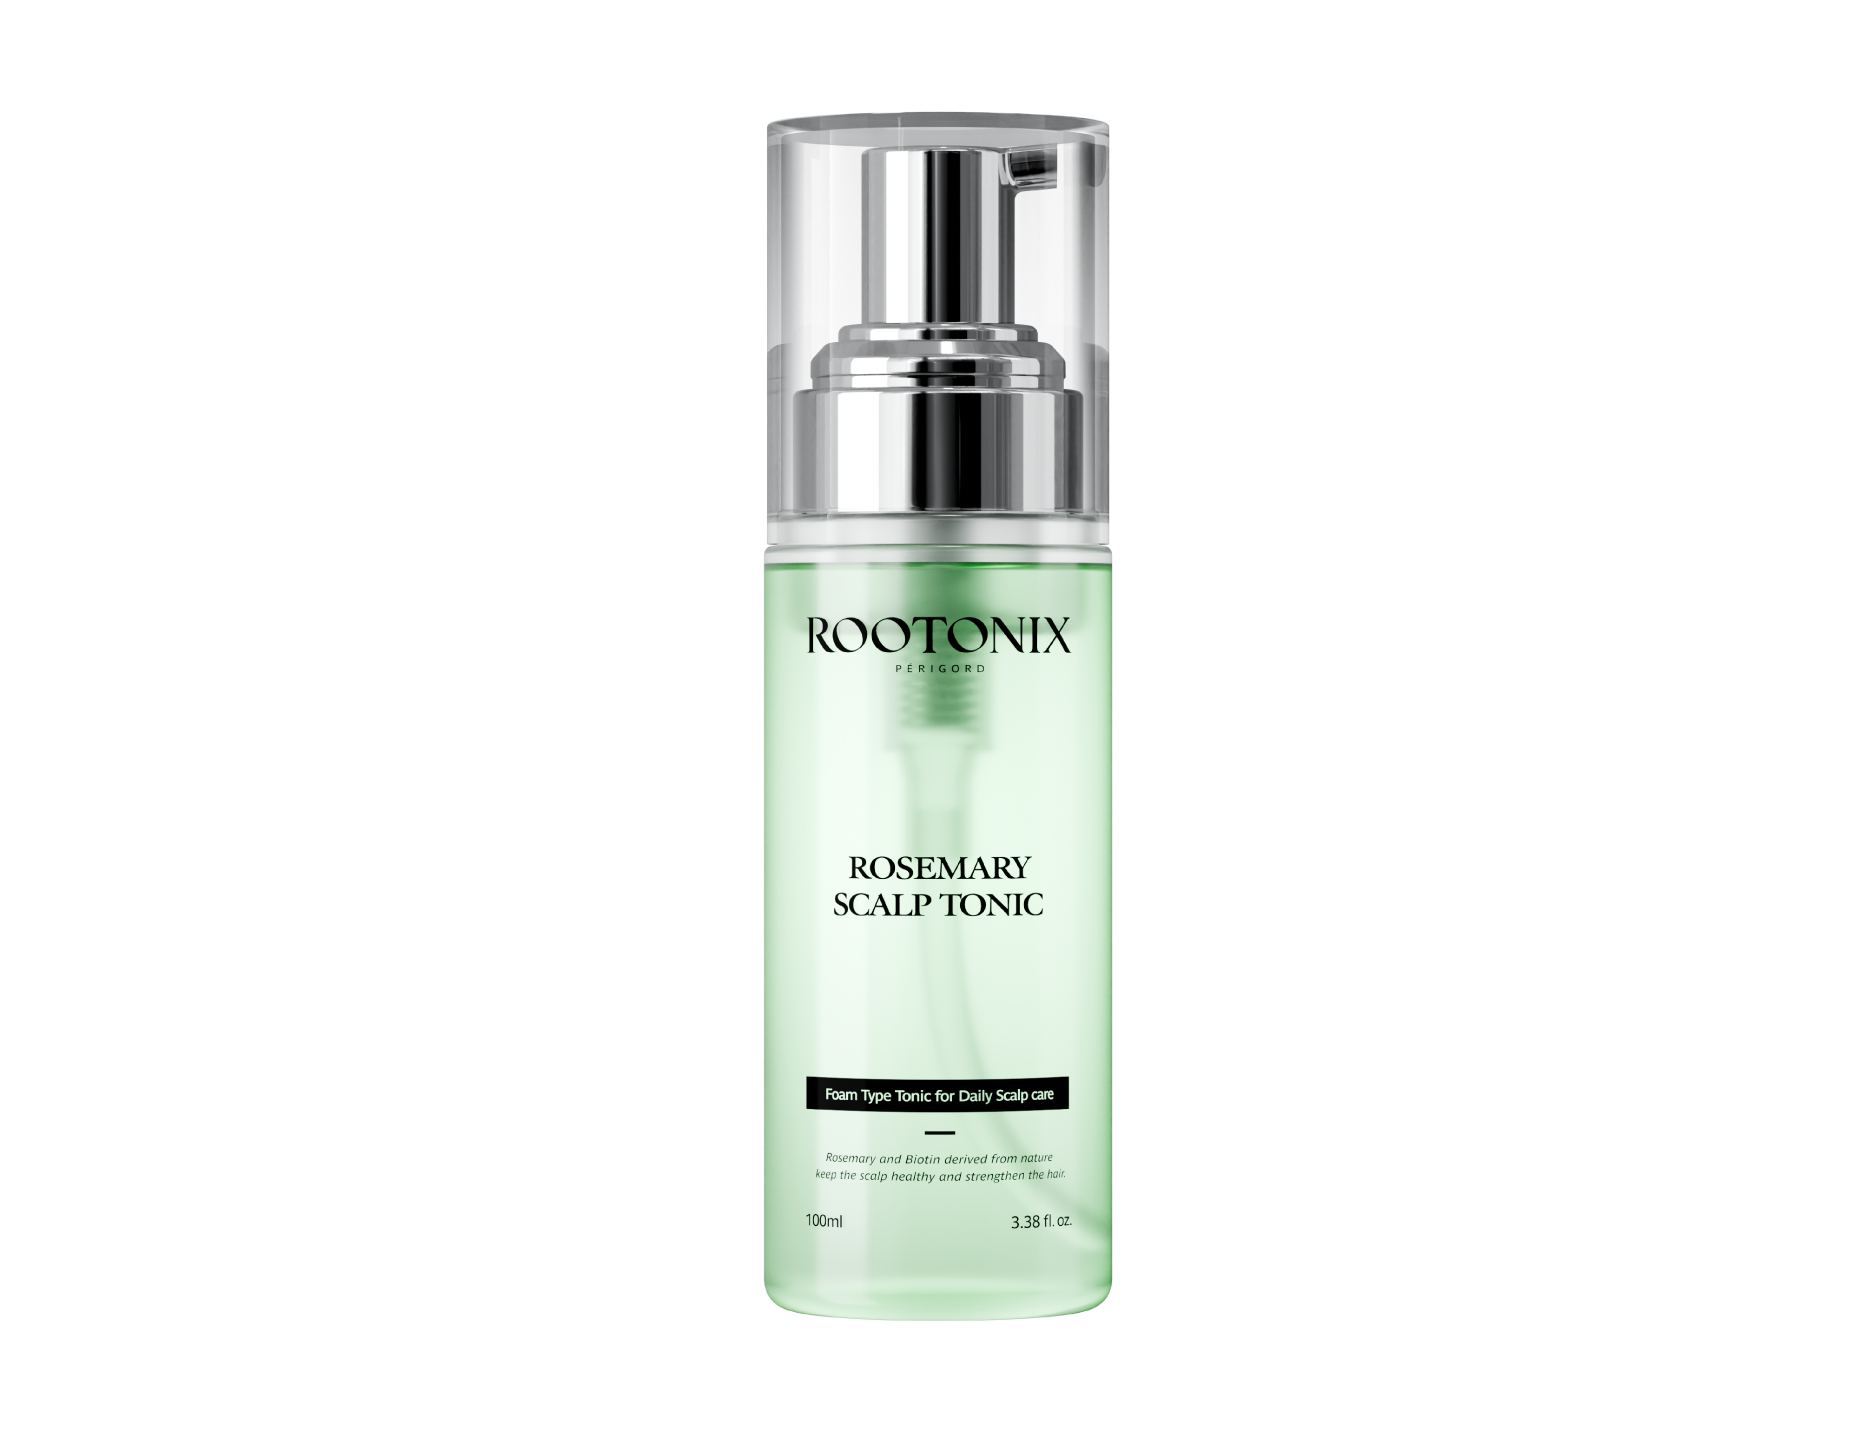 Rootonix Rosemary hair Tonic in a clear, foam dispenser bottle with green label detailing hair care benefits.